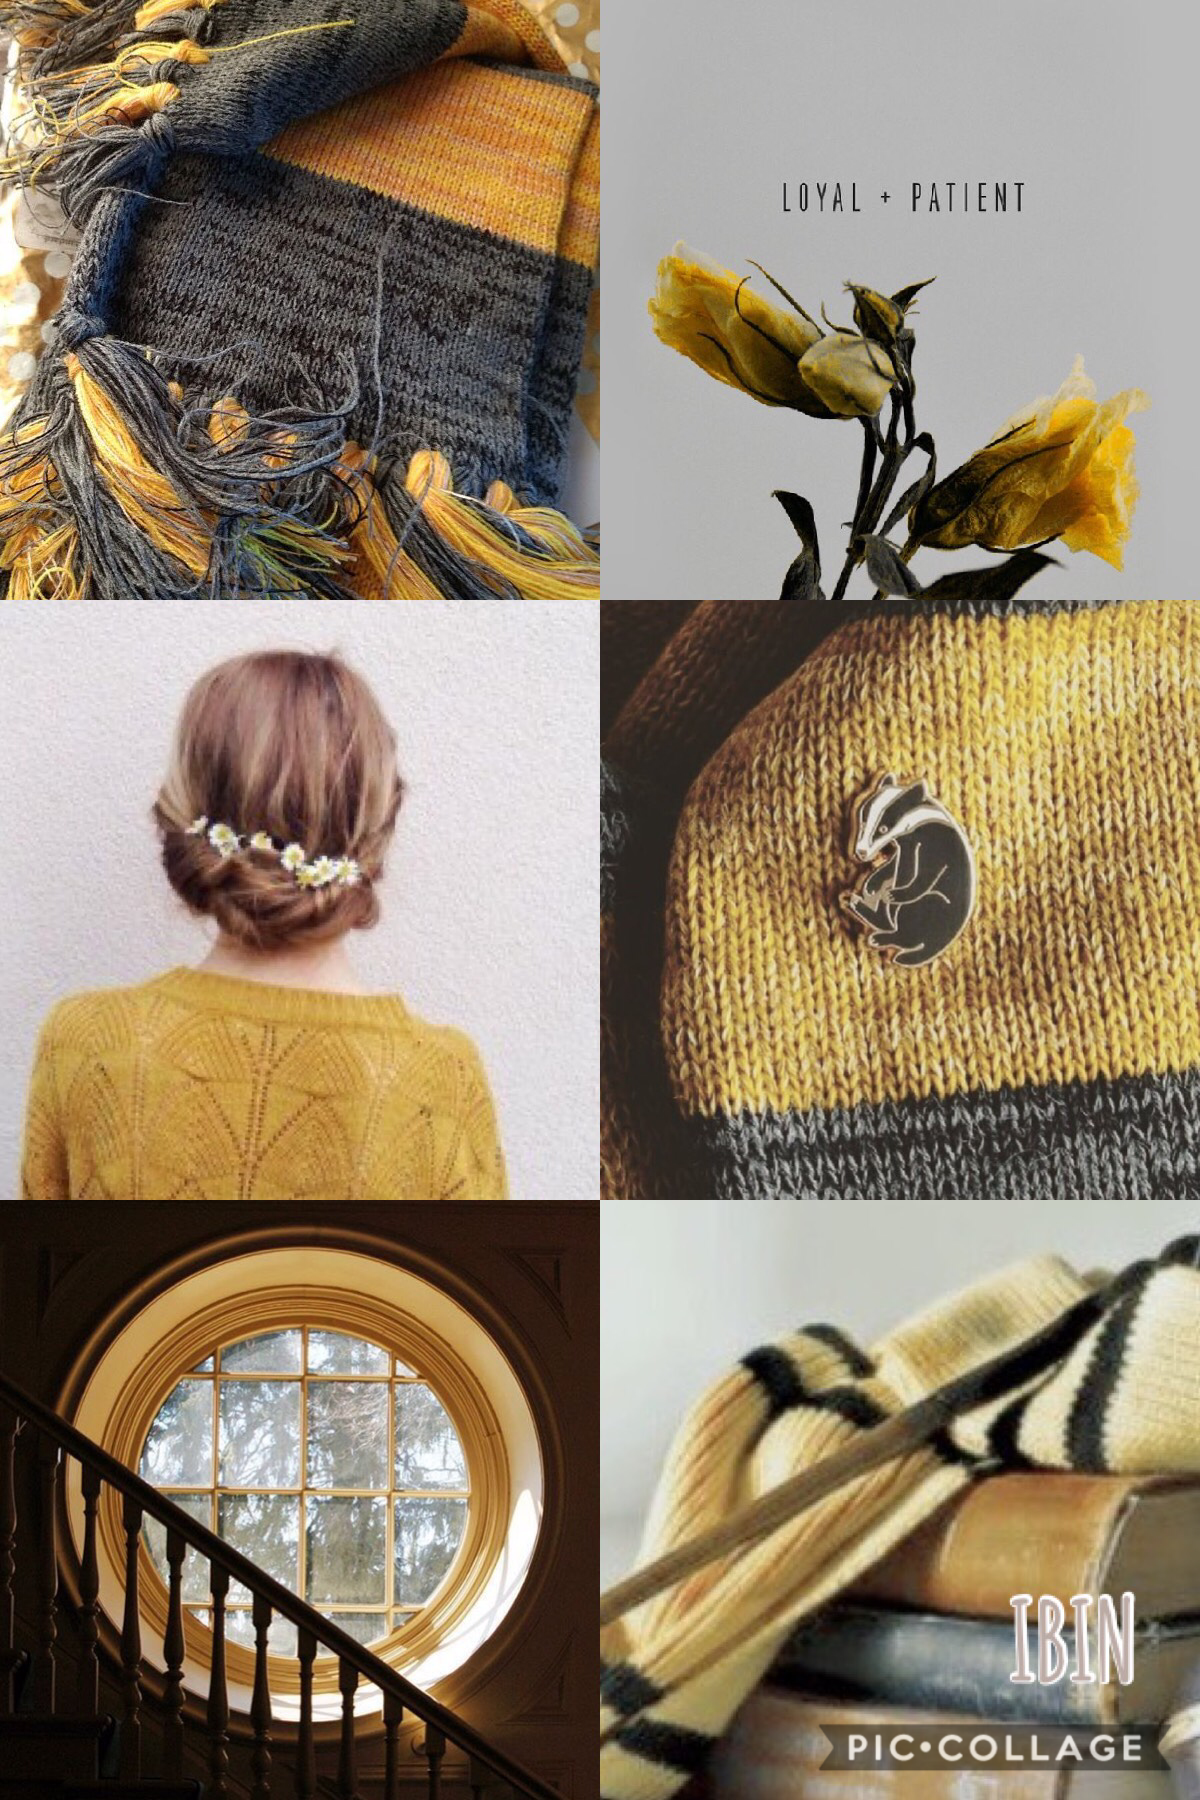 💛tap💛
Made this myself.
Getting bored of fall theme.
I am aware that I do random aesthetics too often.
💛🖤💛🖤💛🖤💛🖤💛
Qotd: Hogwarts House?
Aotd: is it not obvious?